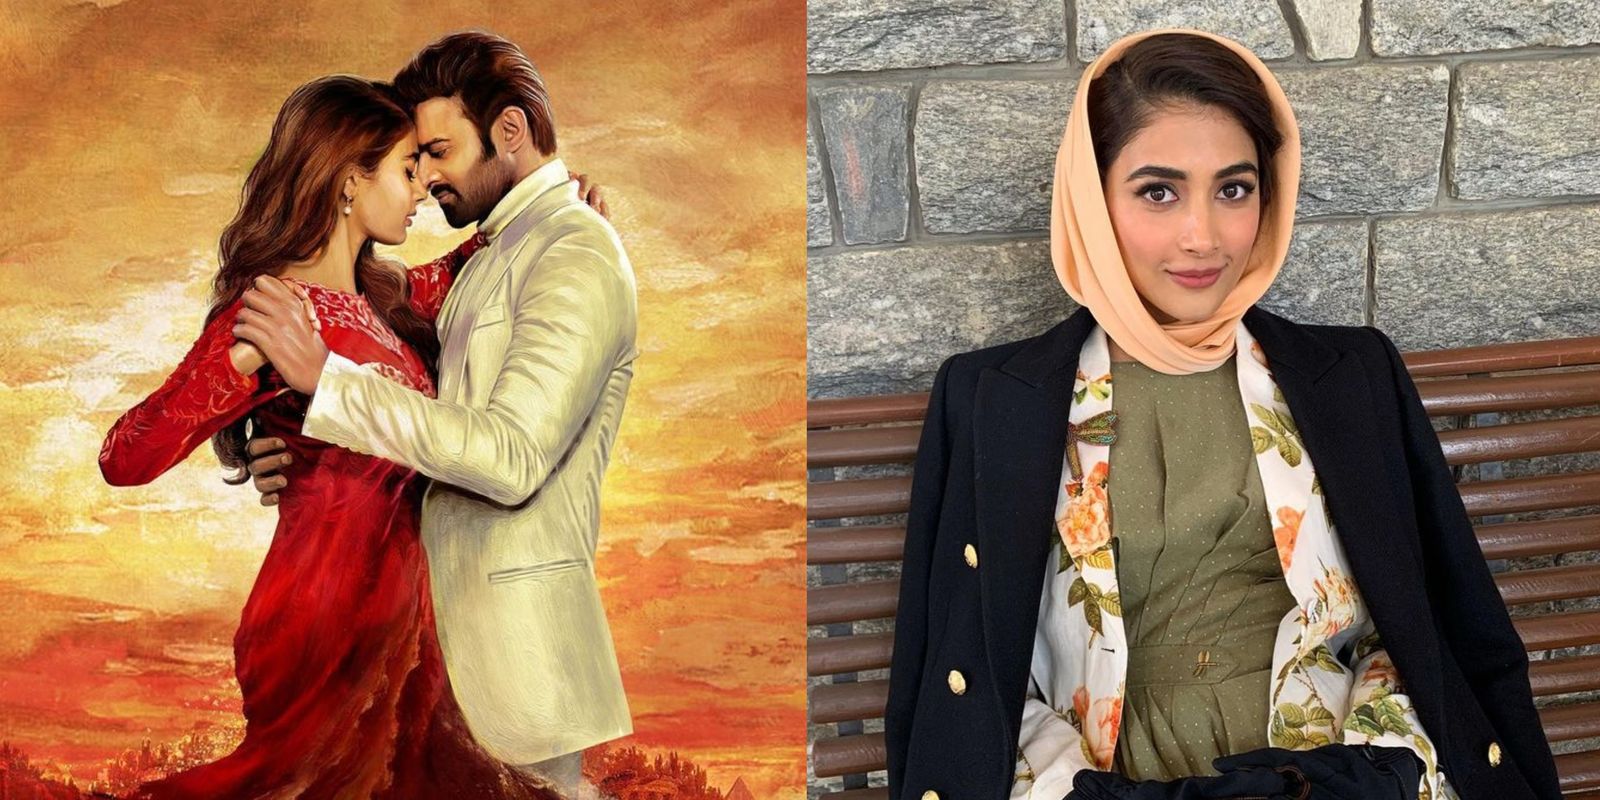 Radhe Shyam: Prabhas’ Co-Star Pooja Hegde Reveals Details Of Her ‘Dreamy’ Look With Quirky Elements